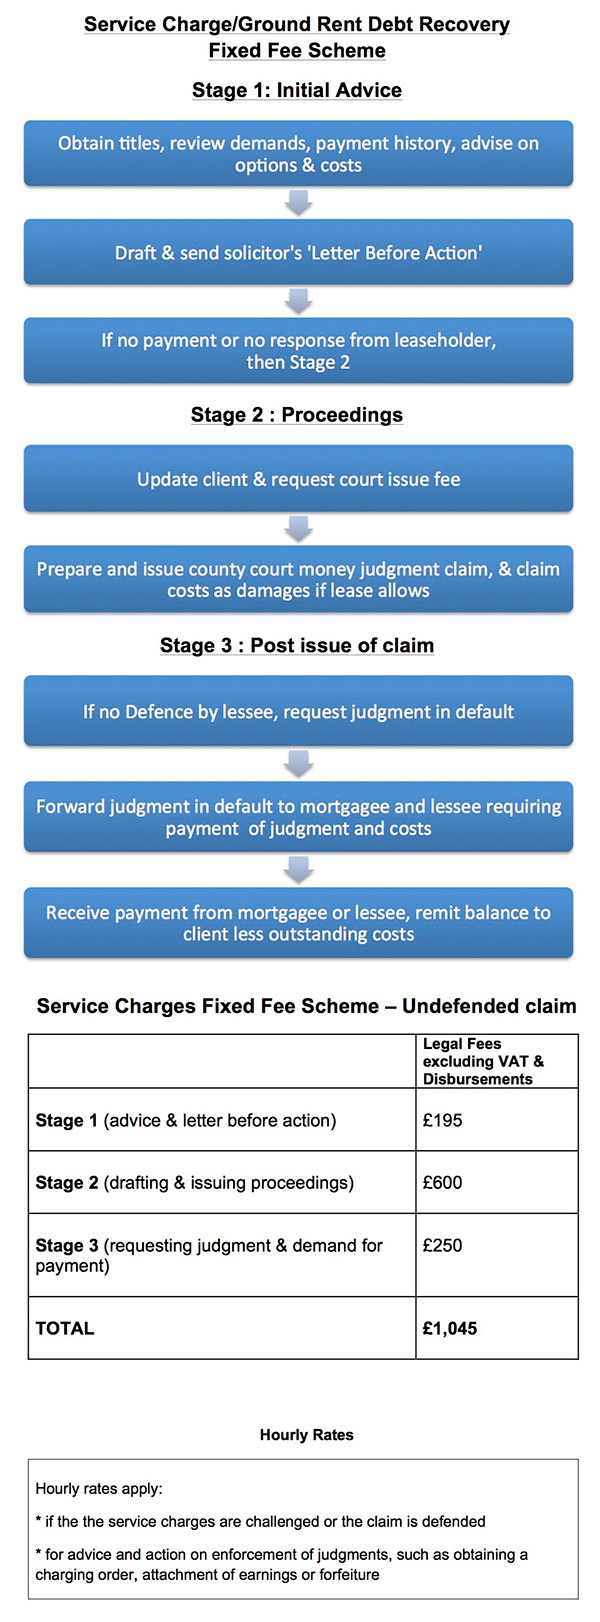 Service Charge Ground Rent Debt Recovery Fixed Fee Scheme infographic flow chart